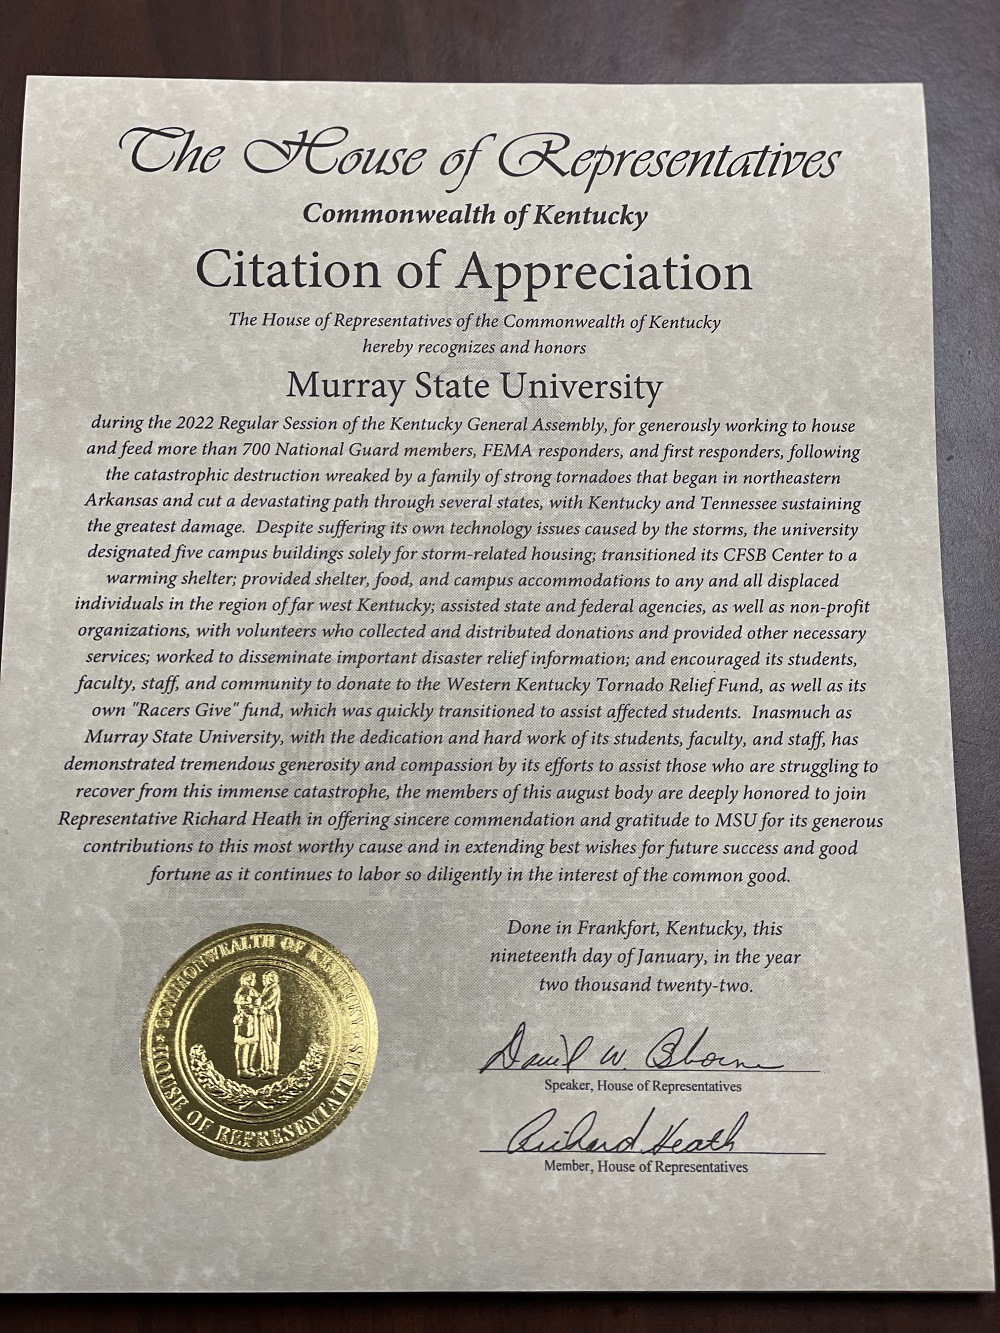 image of the citation received by Murray State from the Kentucky House of Representatives